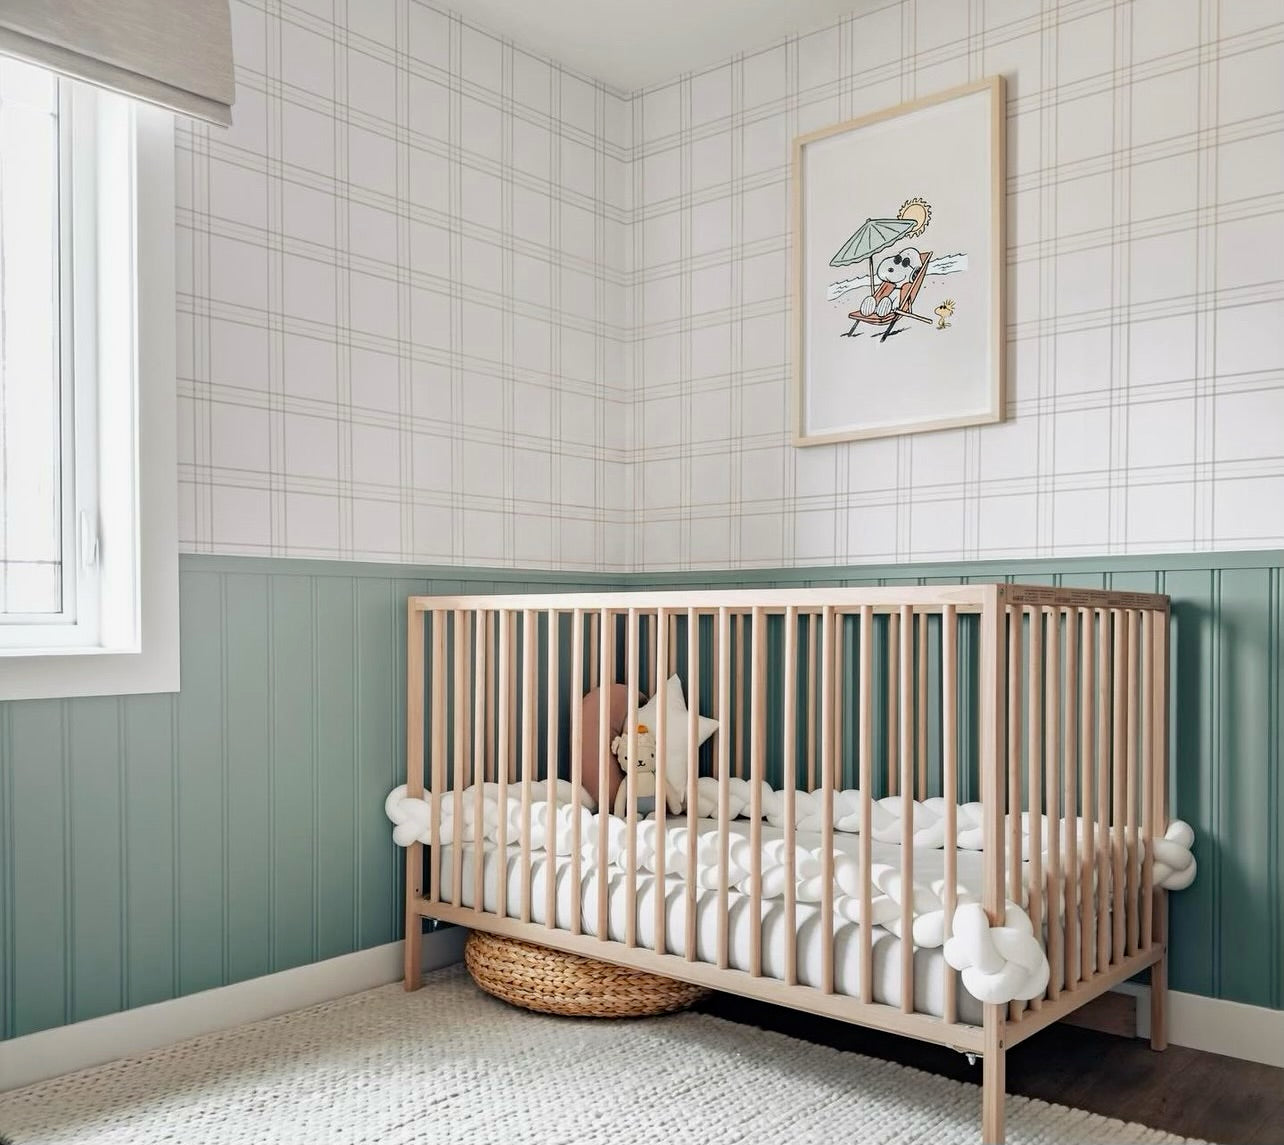 Nursery room featuring Traditional Tartan Plaid Wallpaper with soft gray lines forming a grid pattern, complemented by a lower half wall in green, framing a wooden crib and a playful framed illustration of a bird with an umbrella.